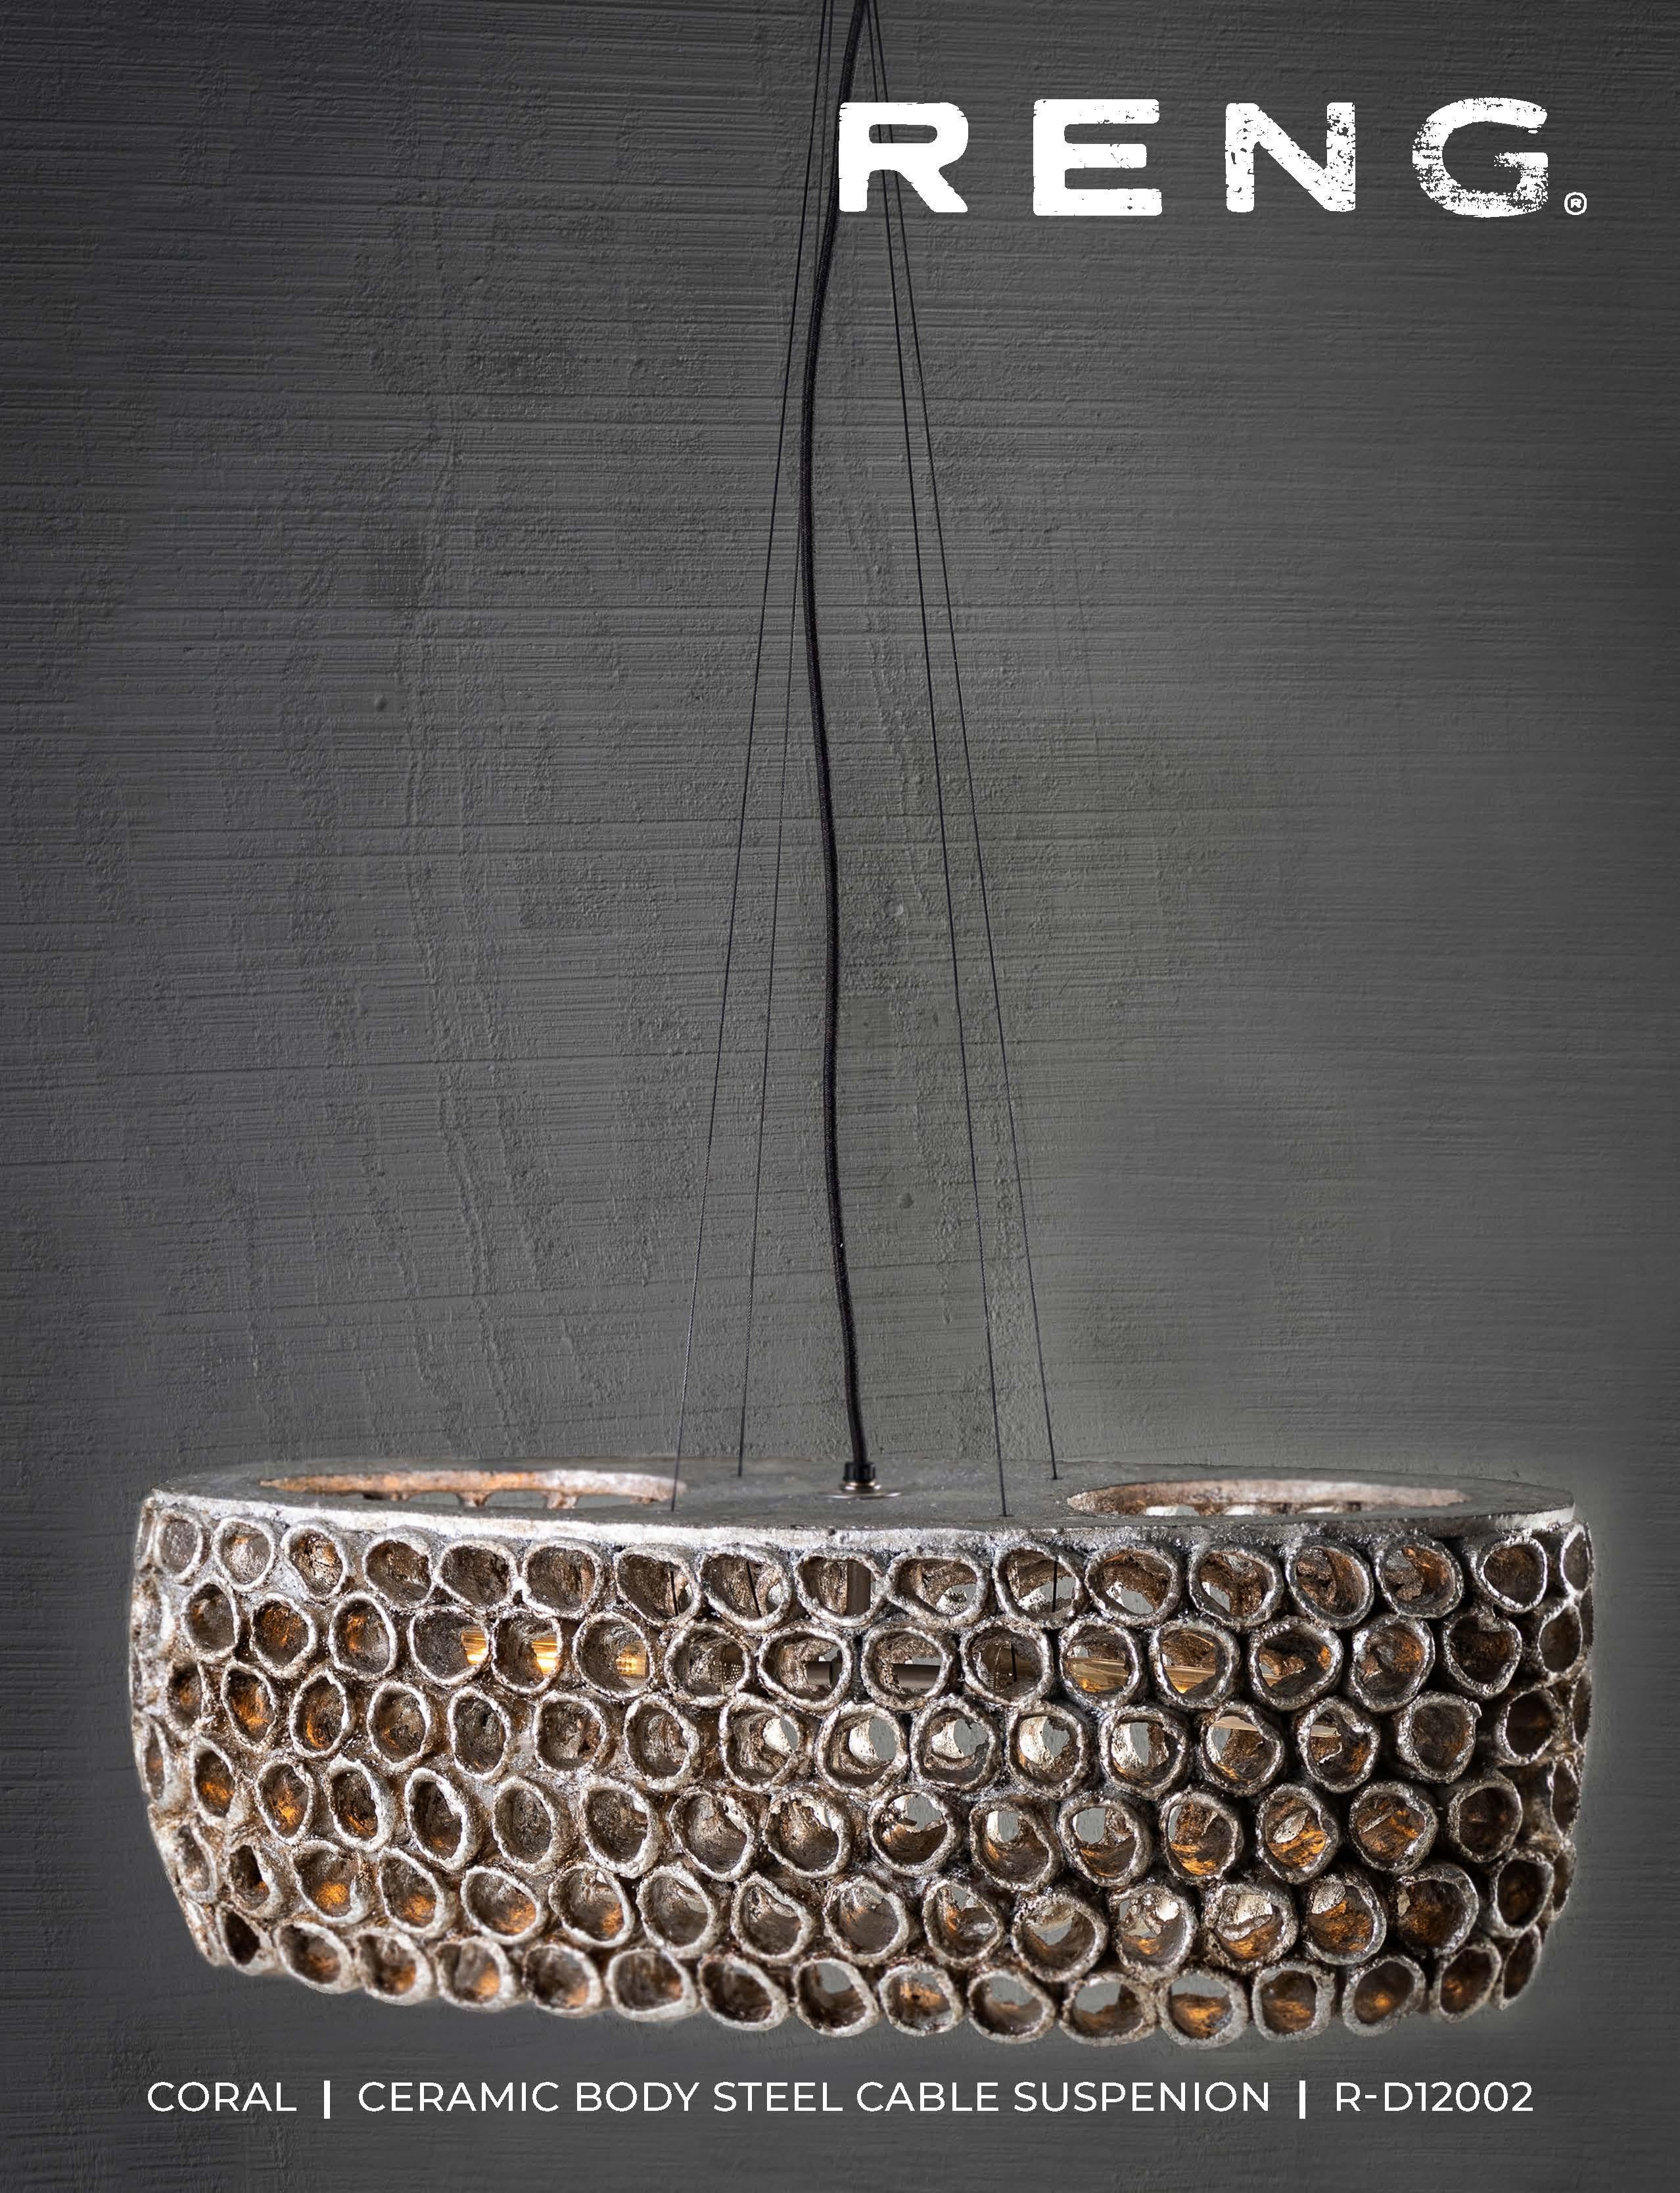 RENG, Coral, Hand Formed Ceramic, Perforated Oceanic Inspired Chandelier  1